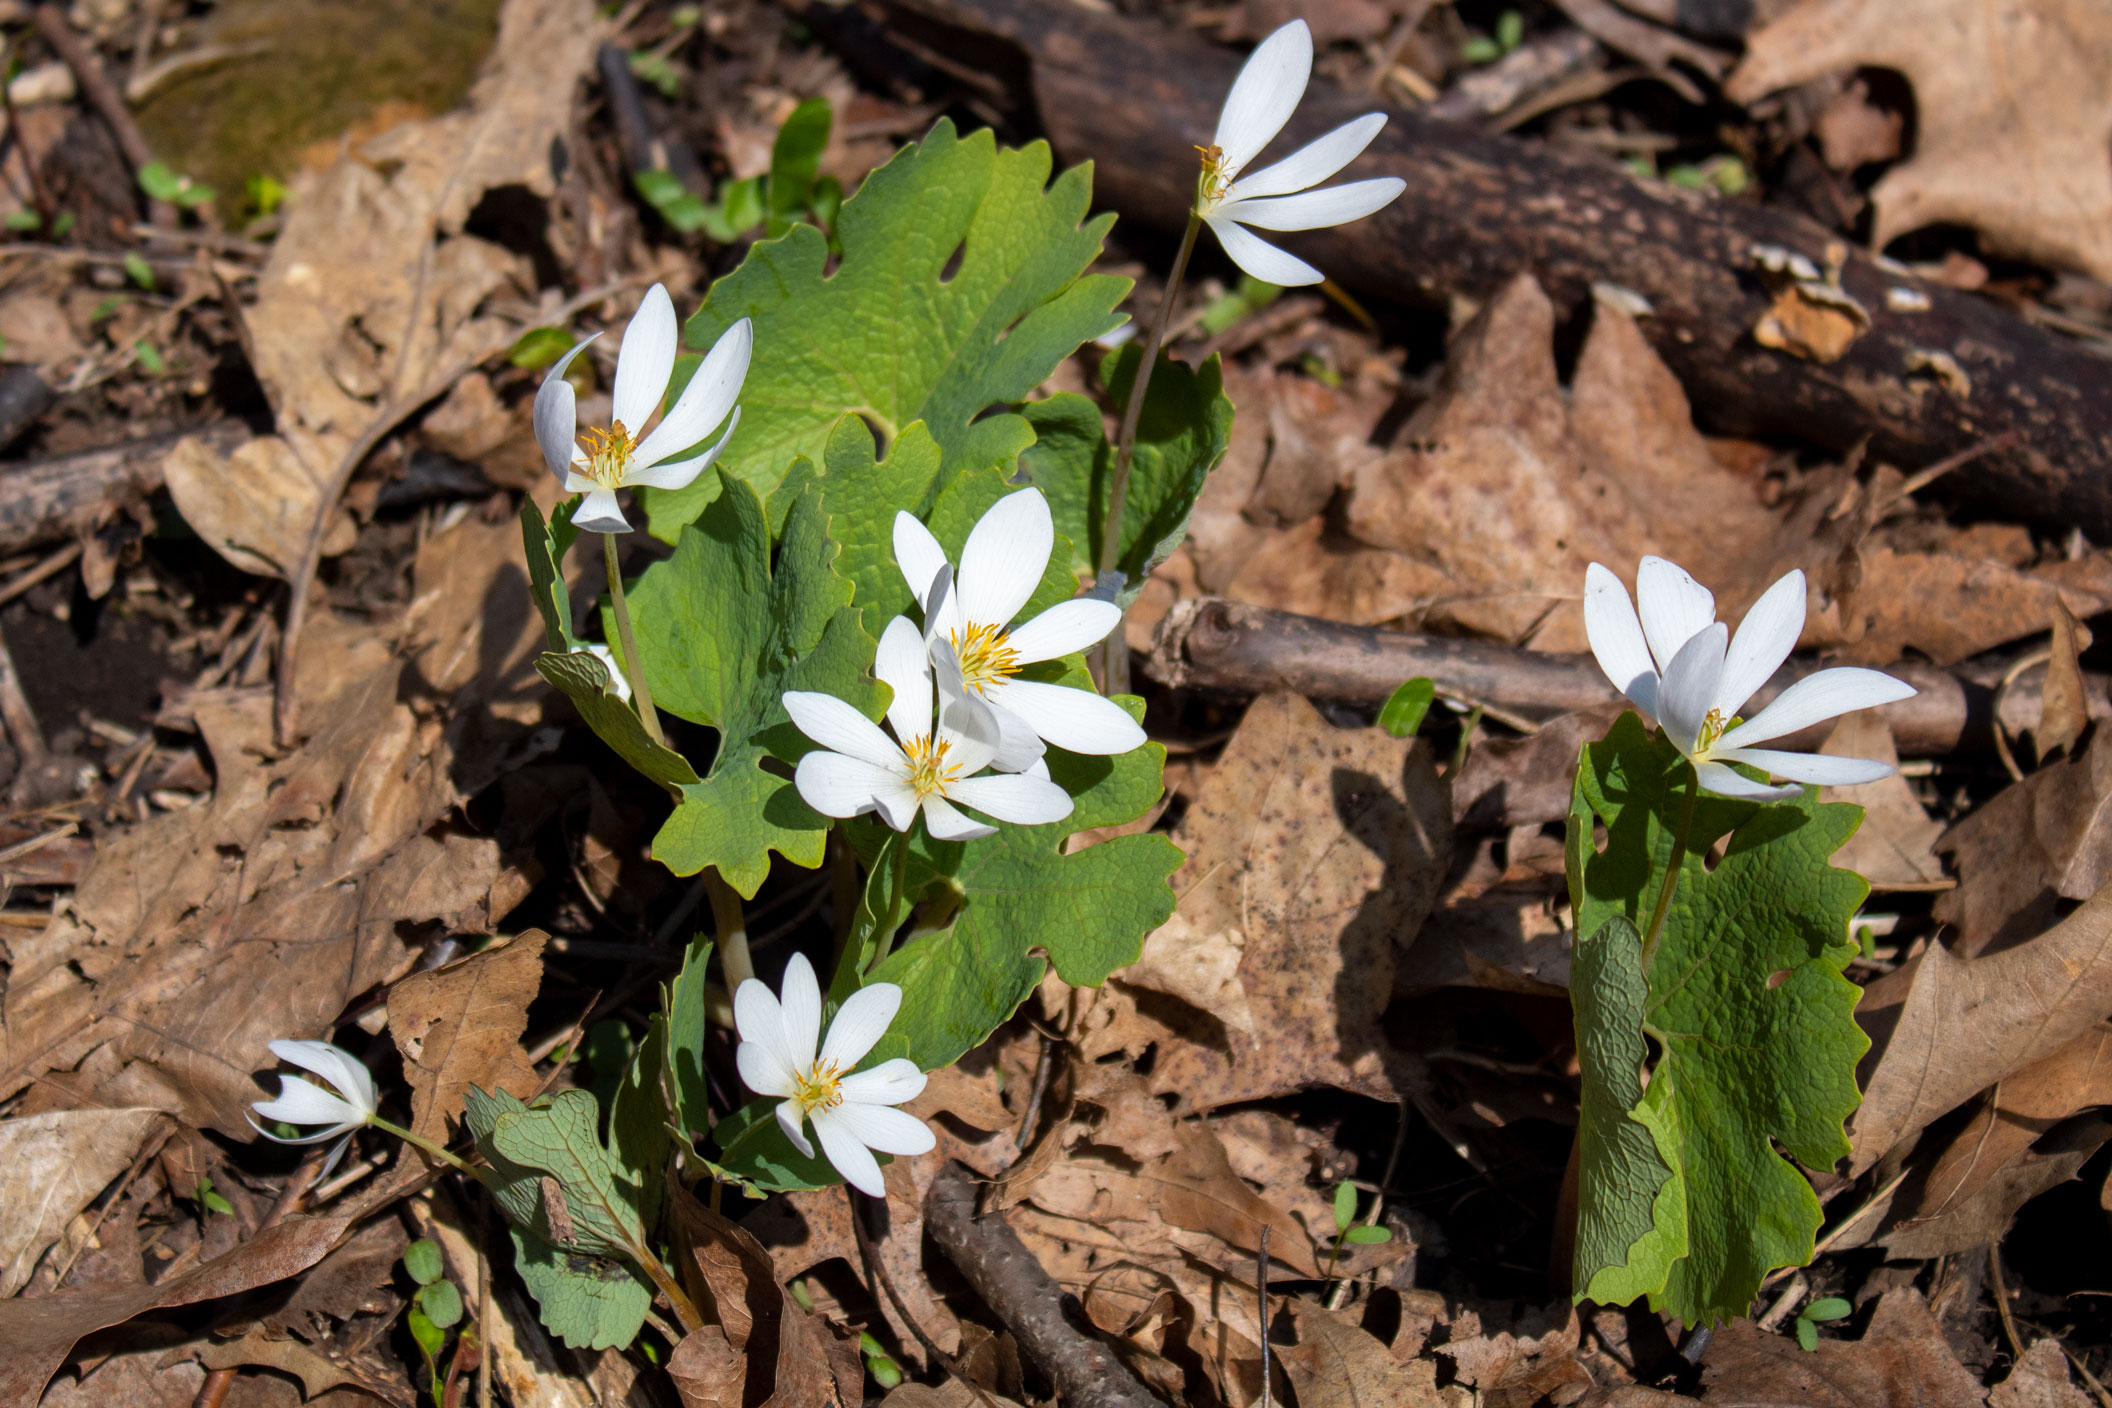 Patch of bloodroot on the forest floor